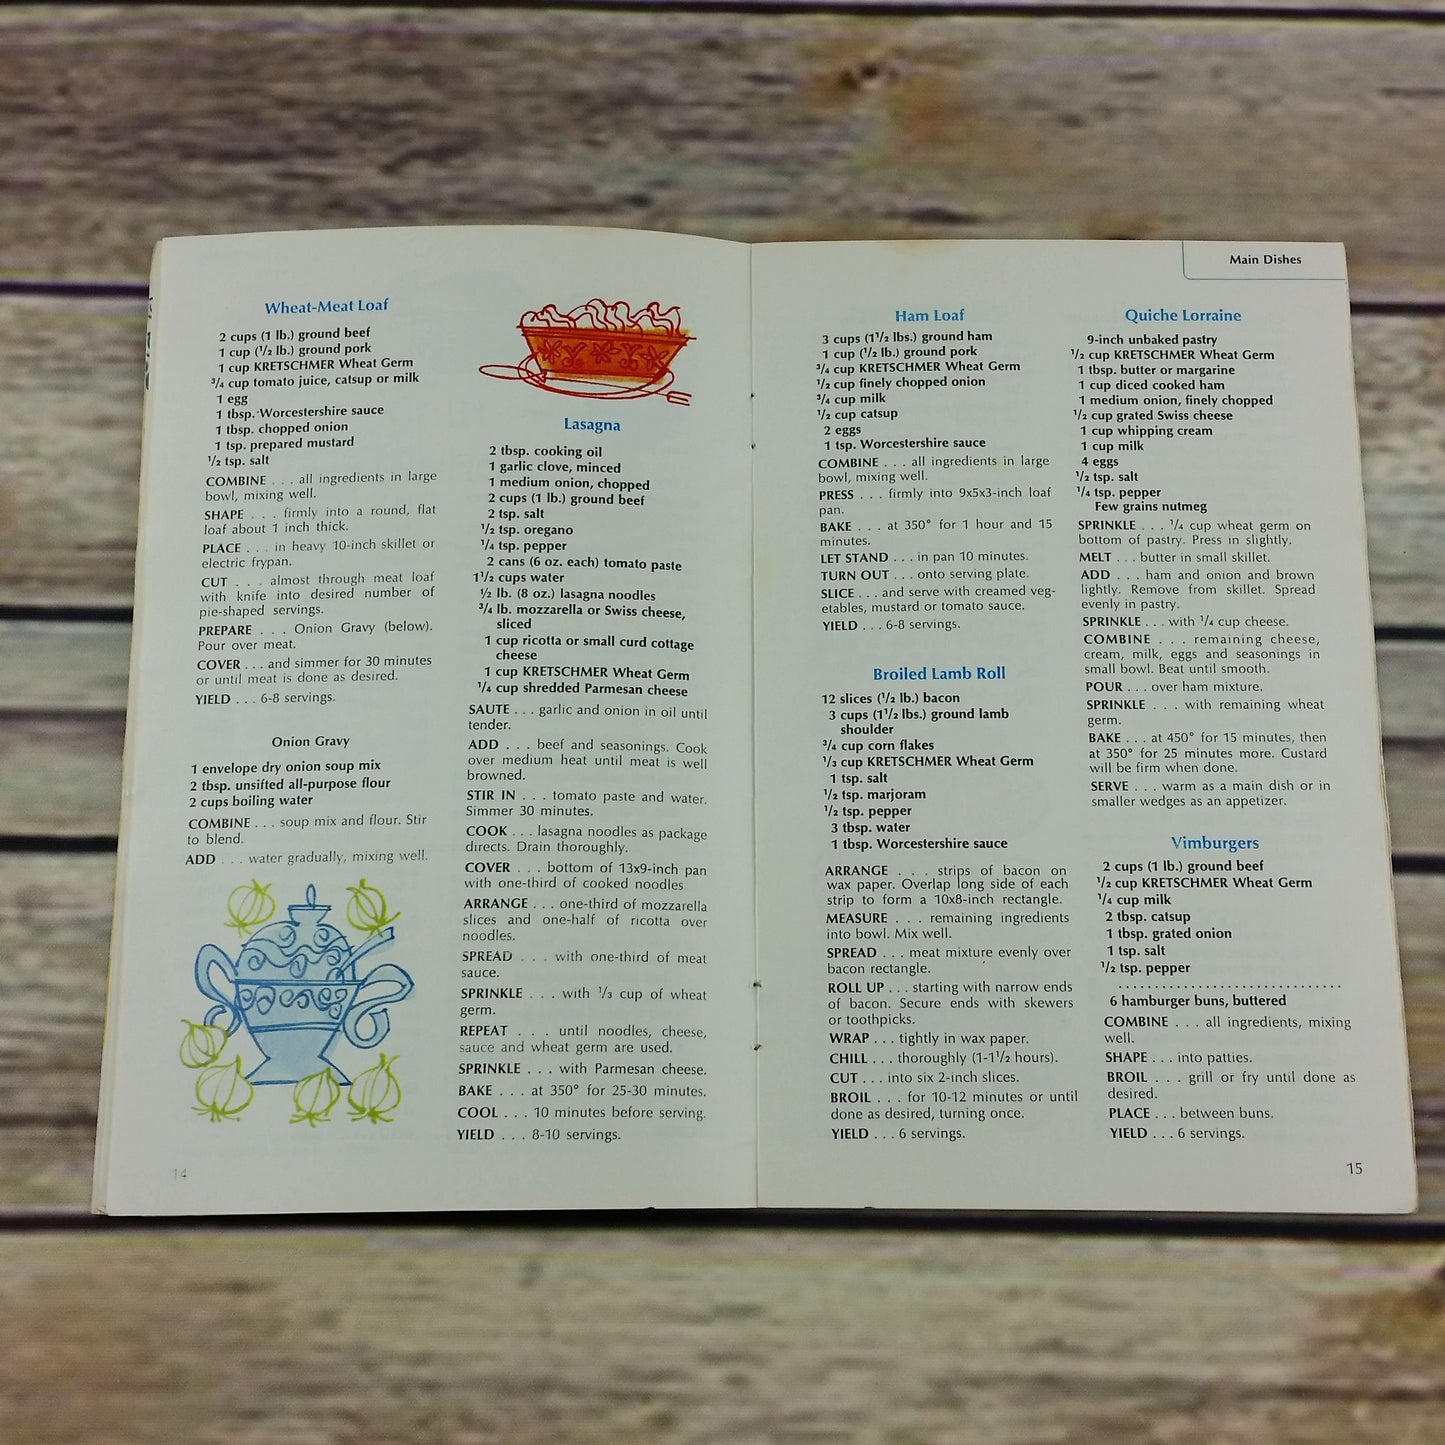 Vintage Cookbook Kretschmer Wheat Germ Recipes With Something Special 1971 Promo Promotional Advertising